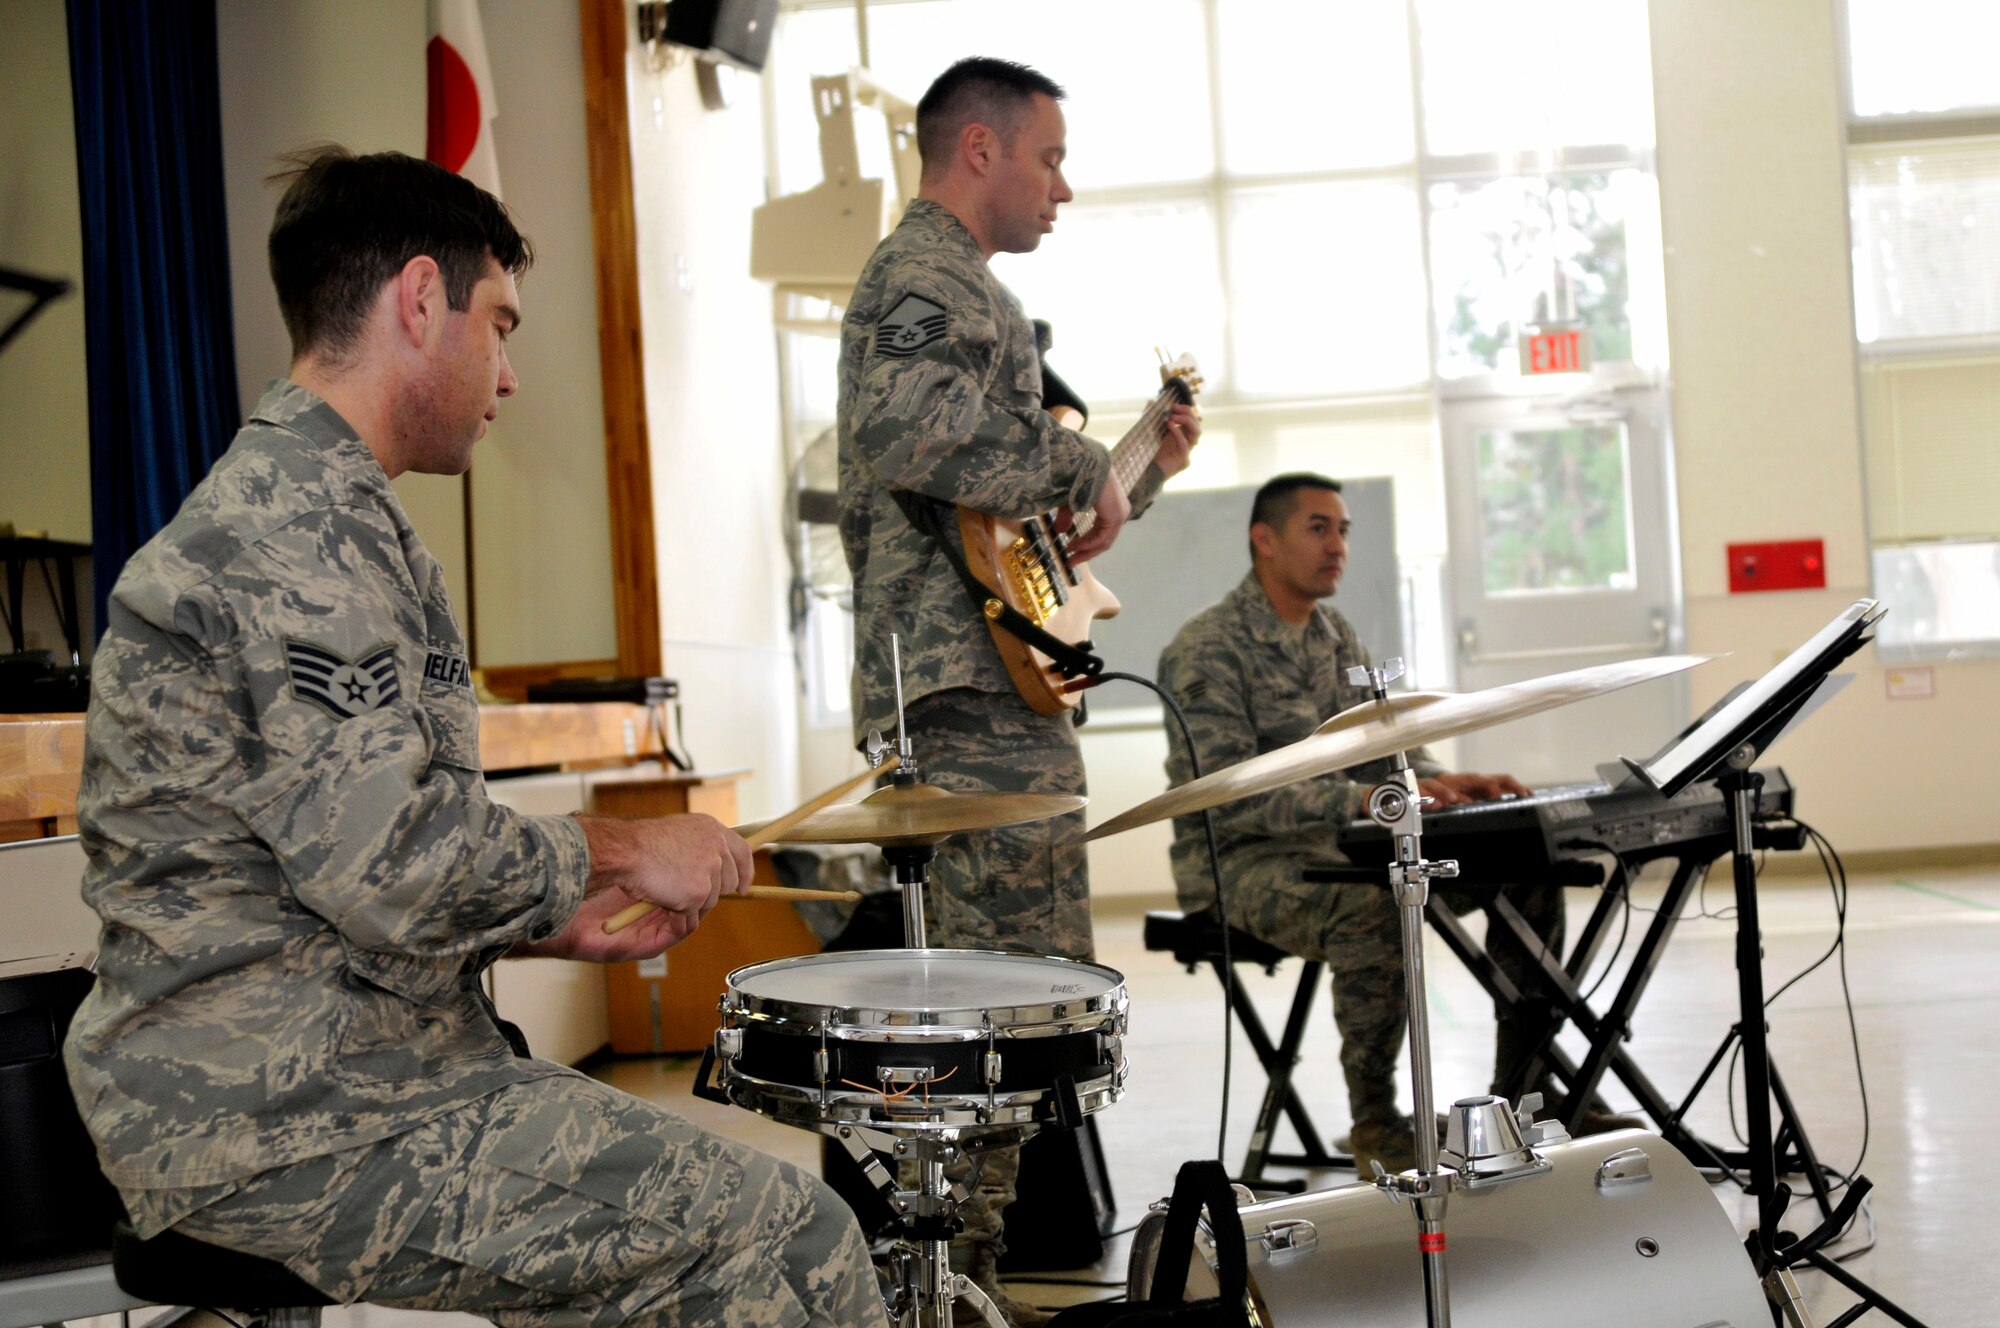 Members of the U.S. Air Force Band of the Pacific-Asia Jazz Combo play an arrangement of Christmas songs for children at Sollars Elementary School Dec. 10, 2012, Misawa Air Base, Japan.  The band didn’t just play for on-base children, they also visited two schools in Misawa City. (U.S. Air Force photo by Tech. Sgt. Phillip Butterfield)